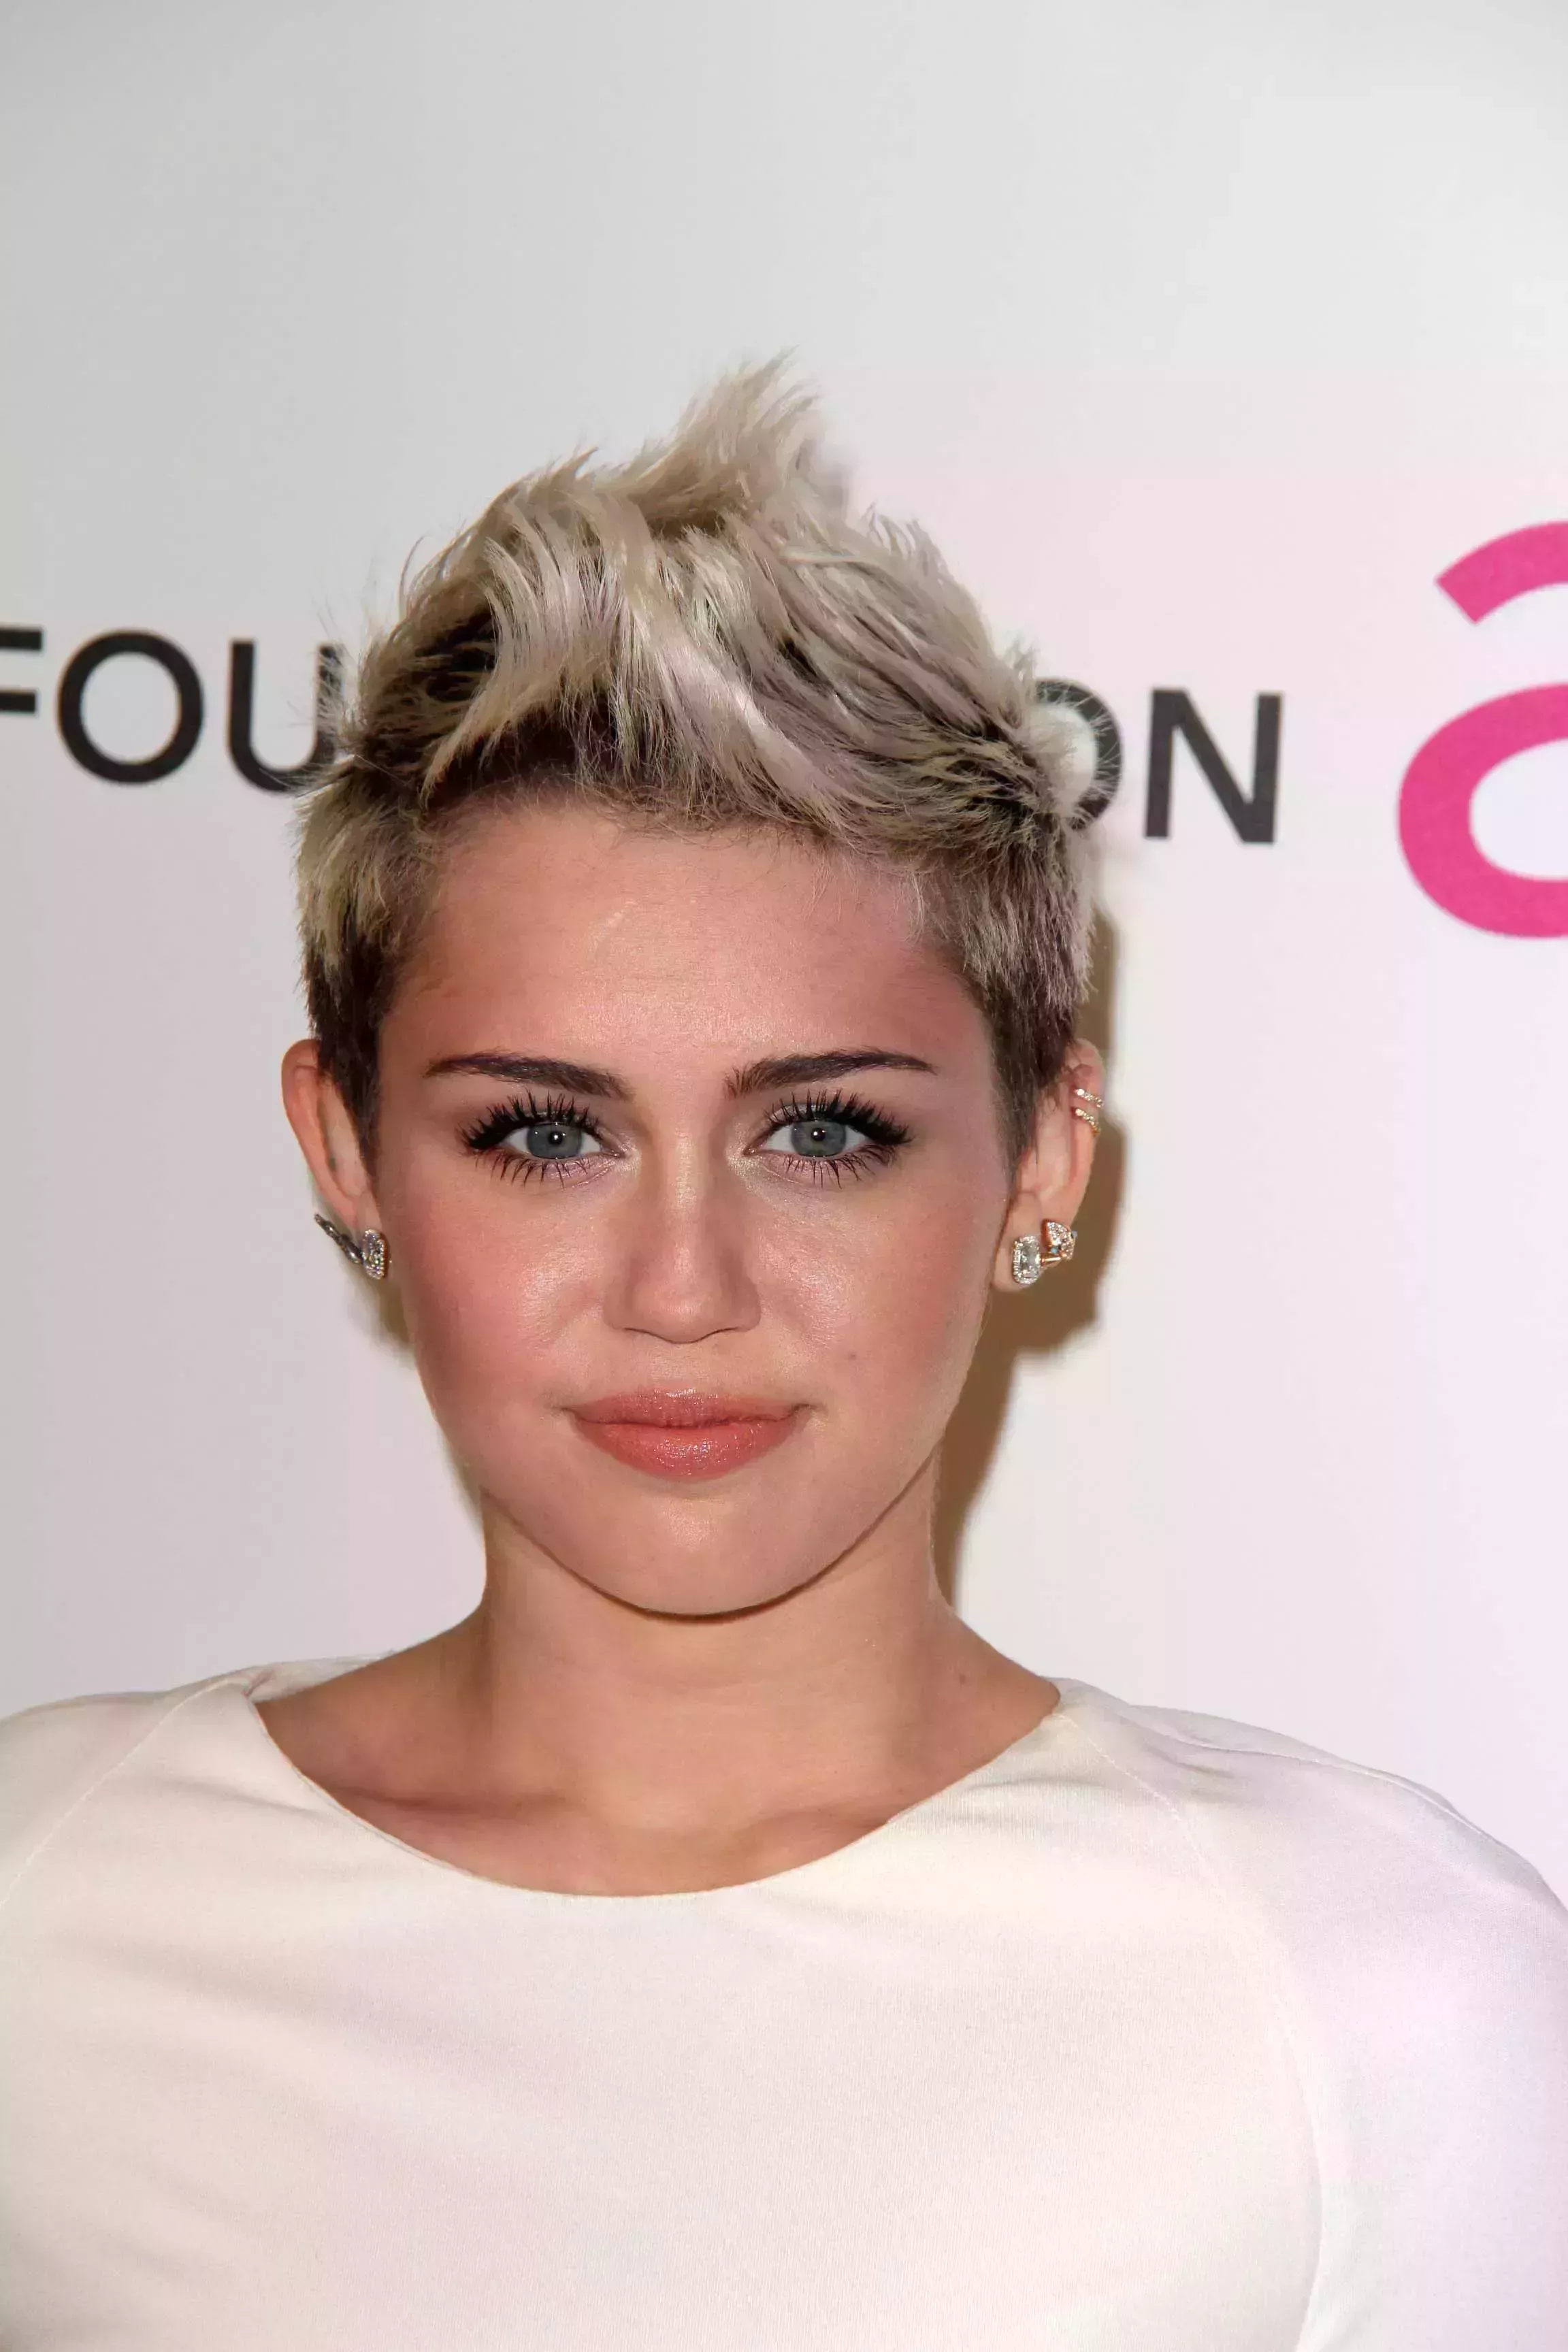 Miley Cyrus’ Silver Faux Hawk with Dark Roots